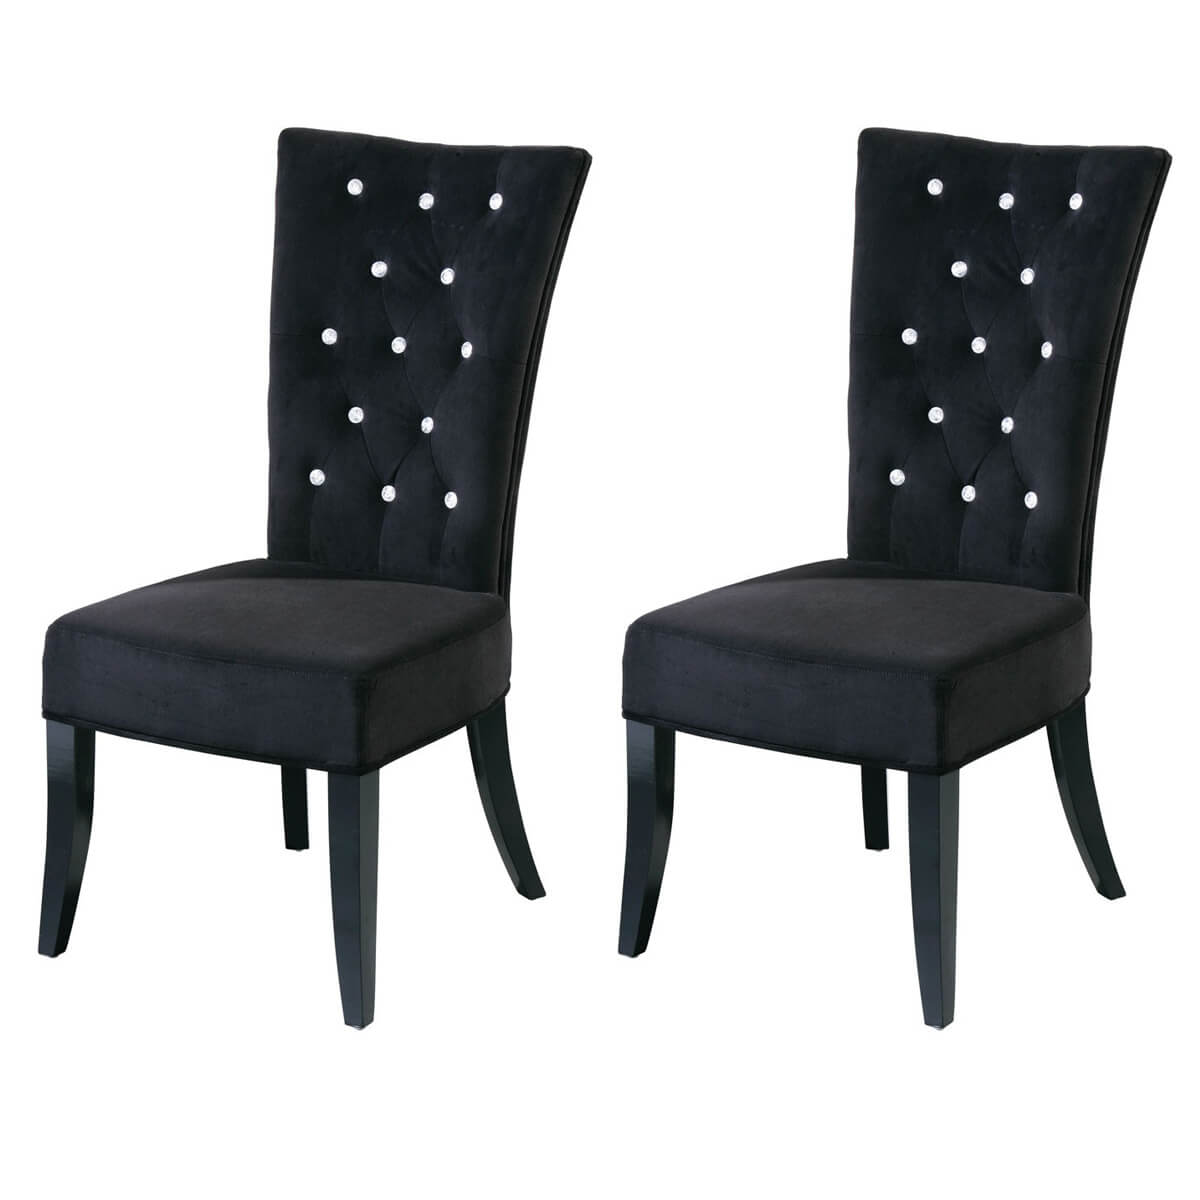 Radiance Black Velvet Dining Chairs Diamante | Dining Chairs | FADS